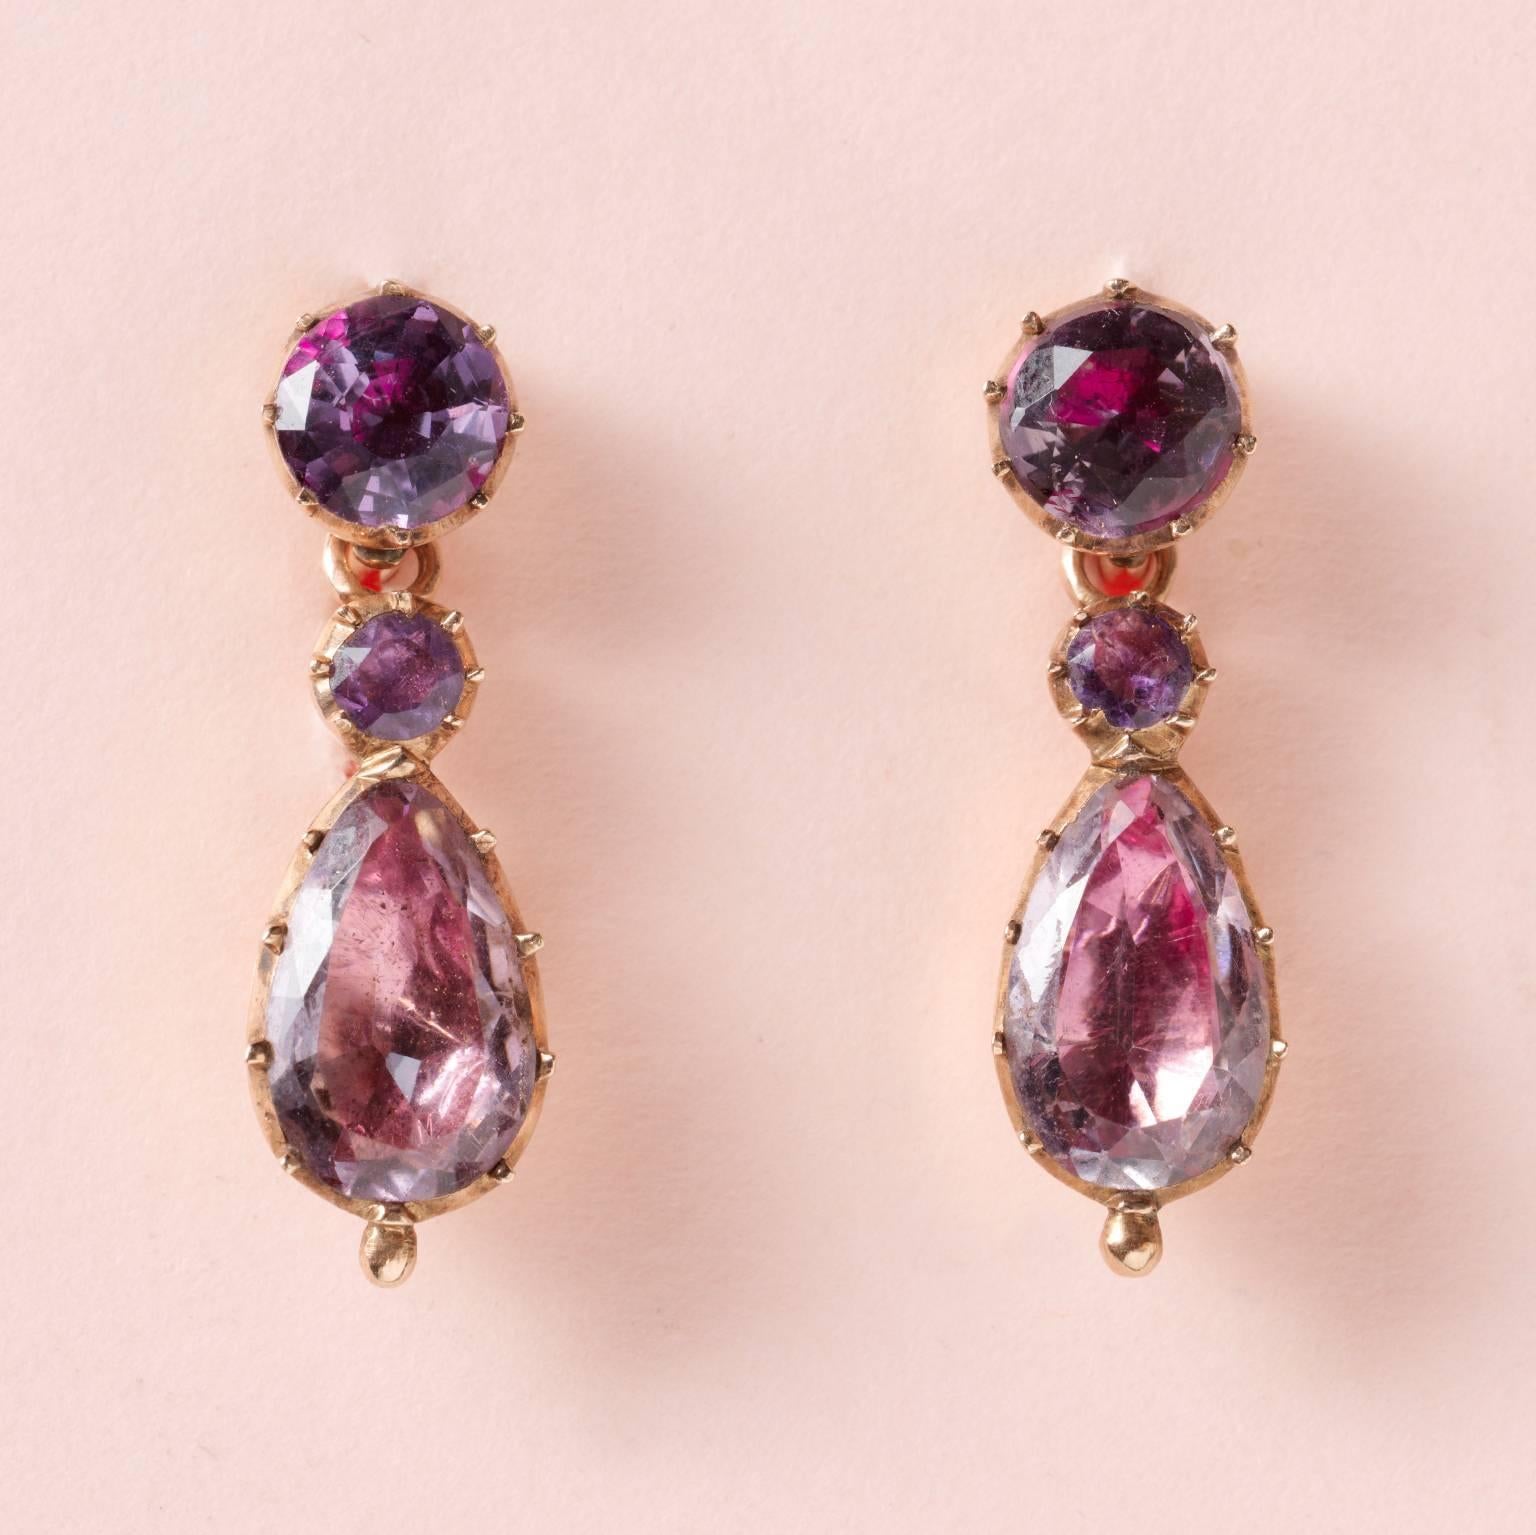 A pair of gold - day and night - earrings with brilliant and pear shaped amethysts on pink gold foil: England, circa 1800.

weight: 5.3 grams
dimensions: 2.6 x 0.9 cm